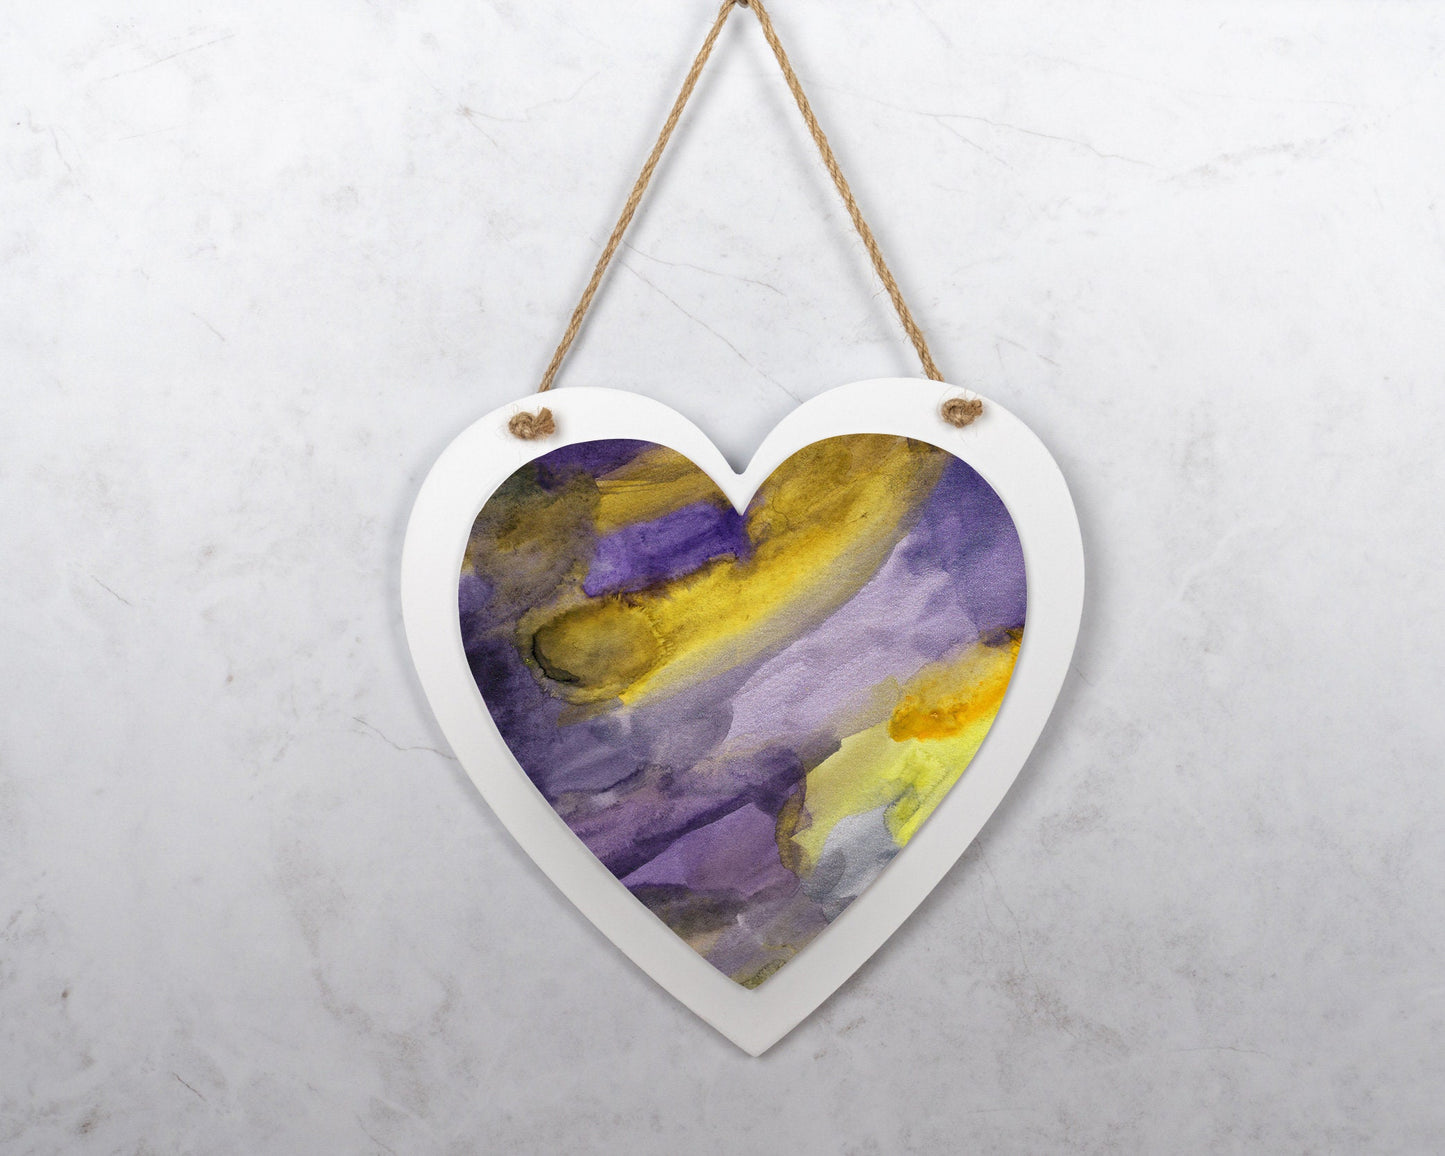 Pride Heart Hanging Sign - Multiple Designs Available